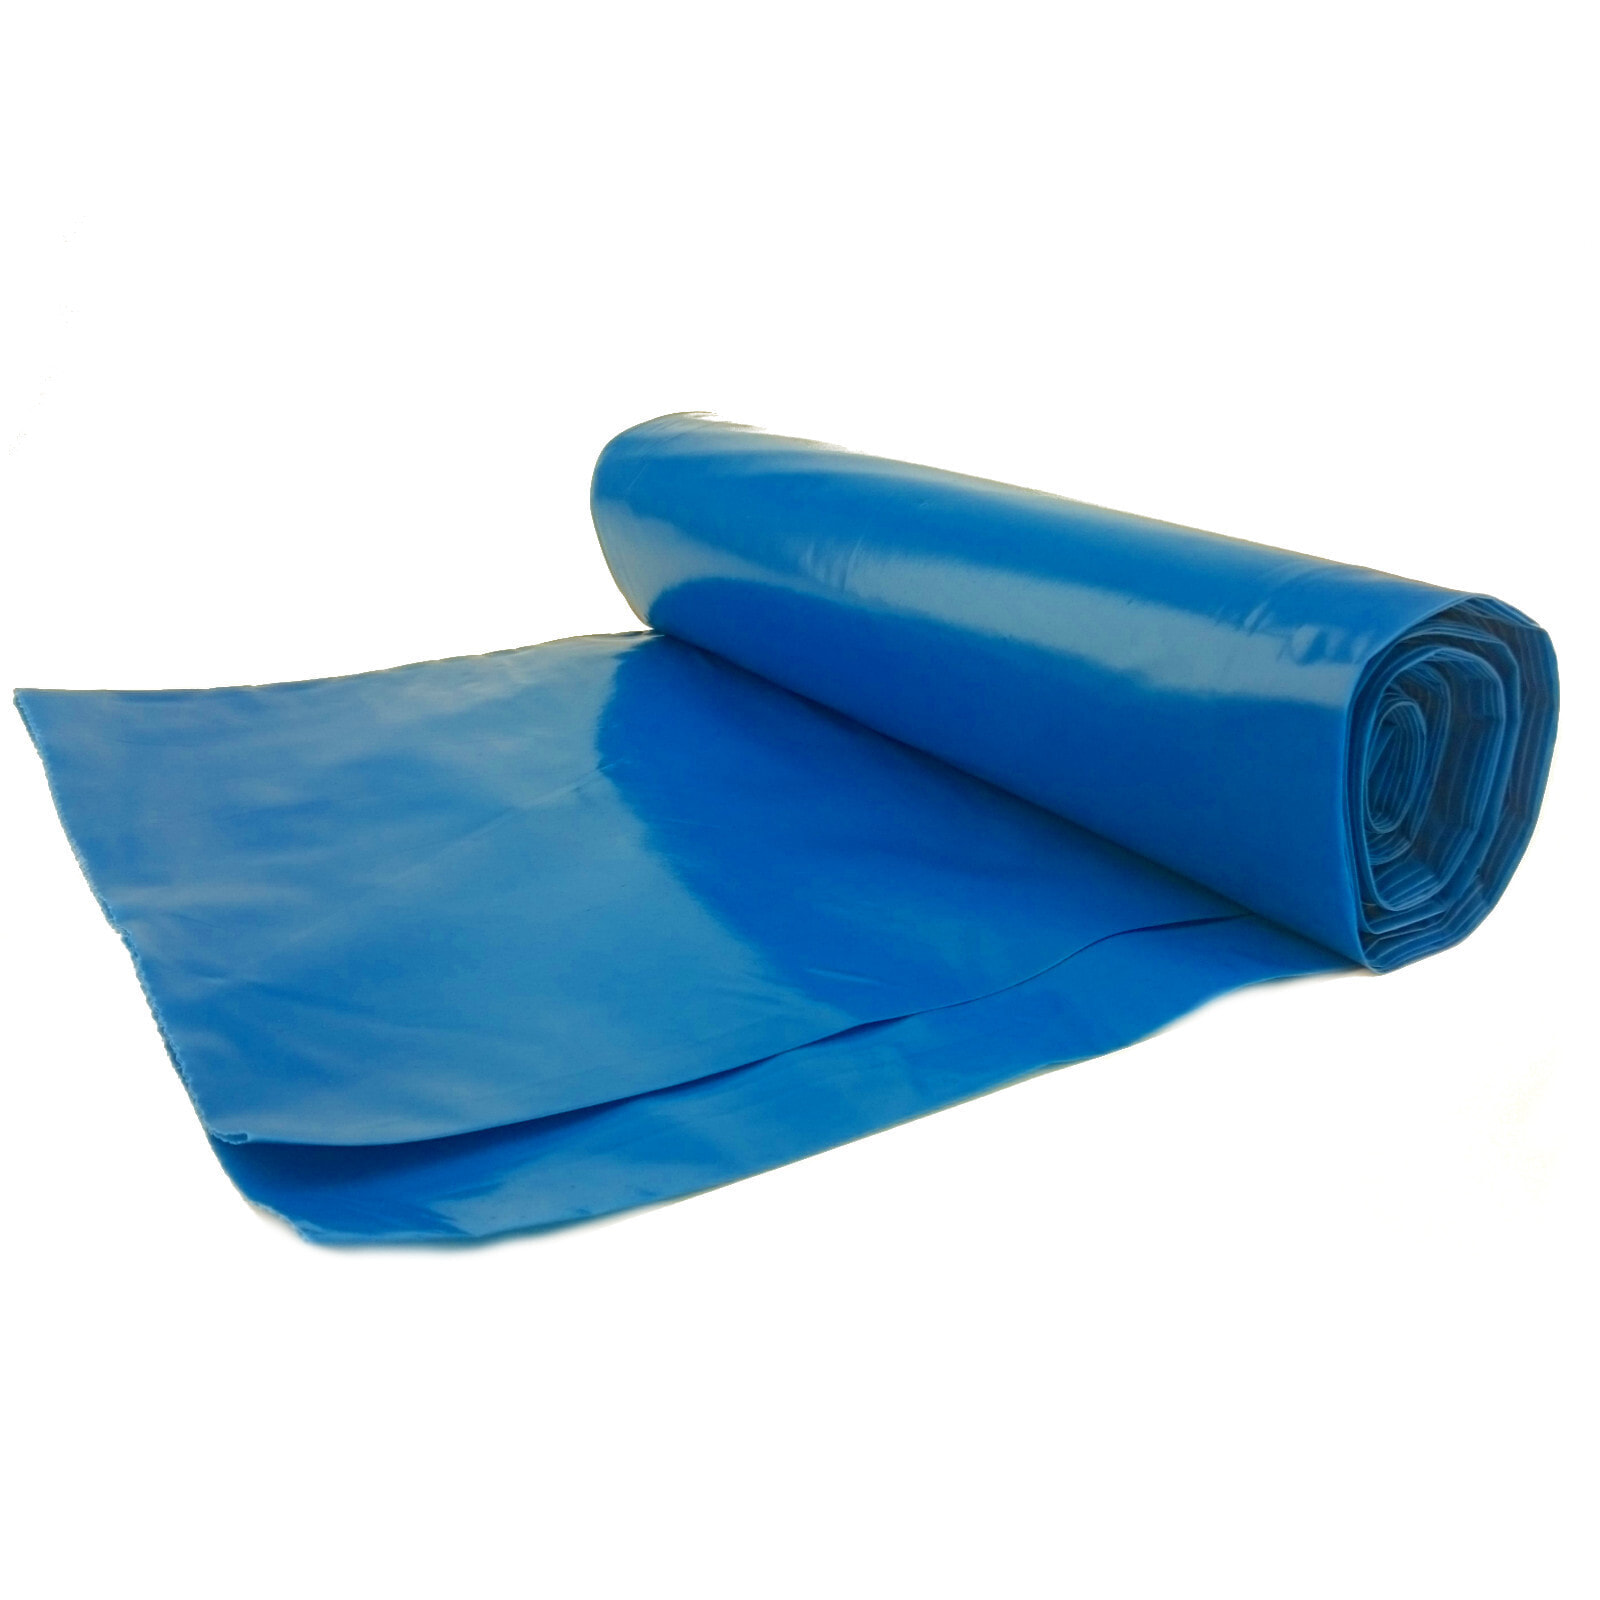 50 micron thick garbage bags. durable roll 25 pcs. - blue 70L